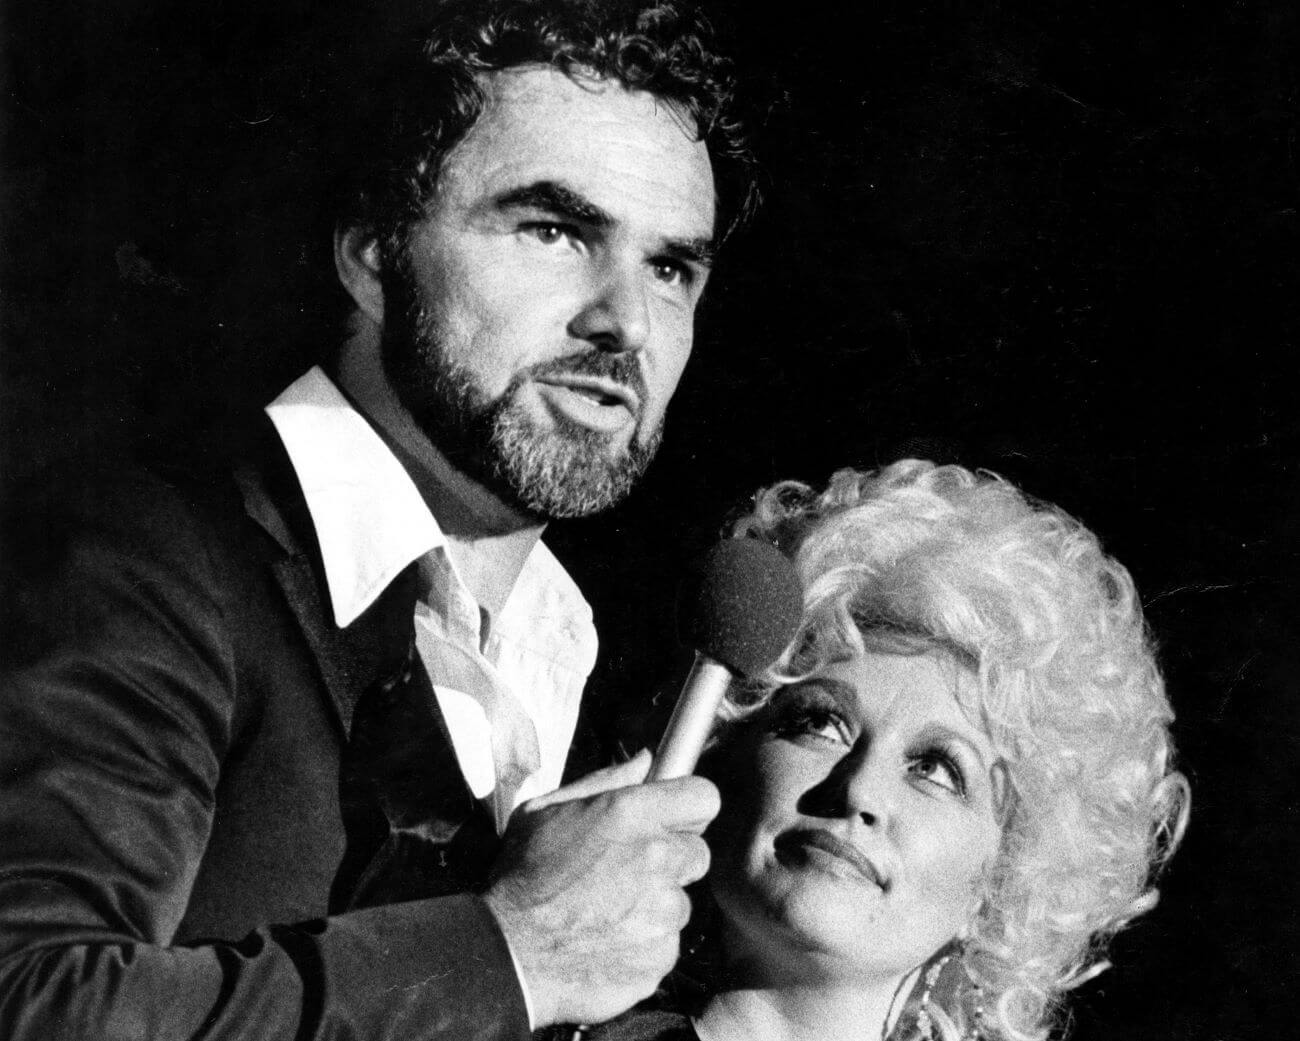 A black and white picture of Burt Reynolds speaking into a microphone and Dolly Parton looking up at him.